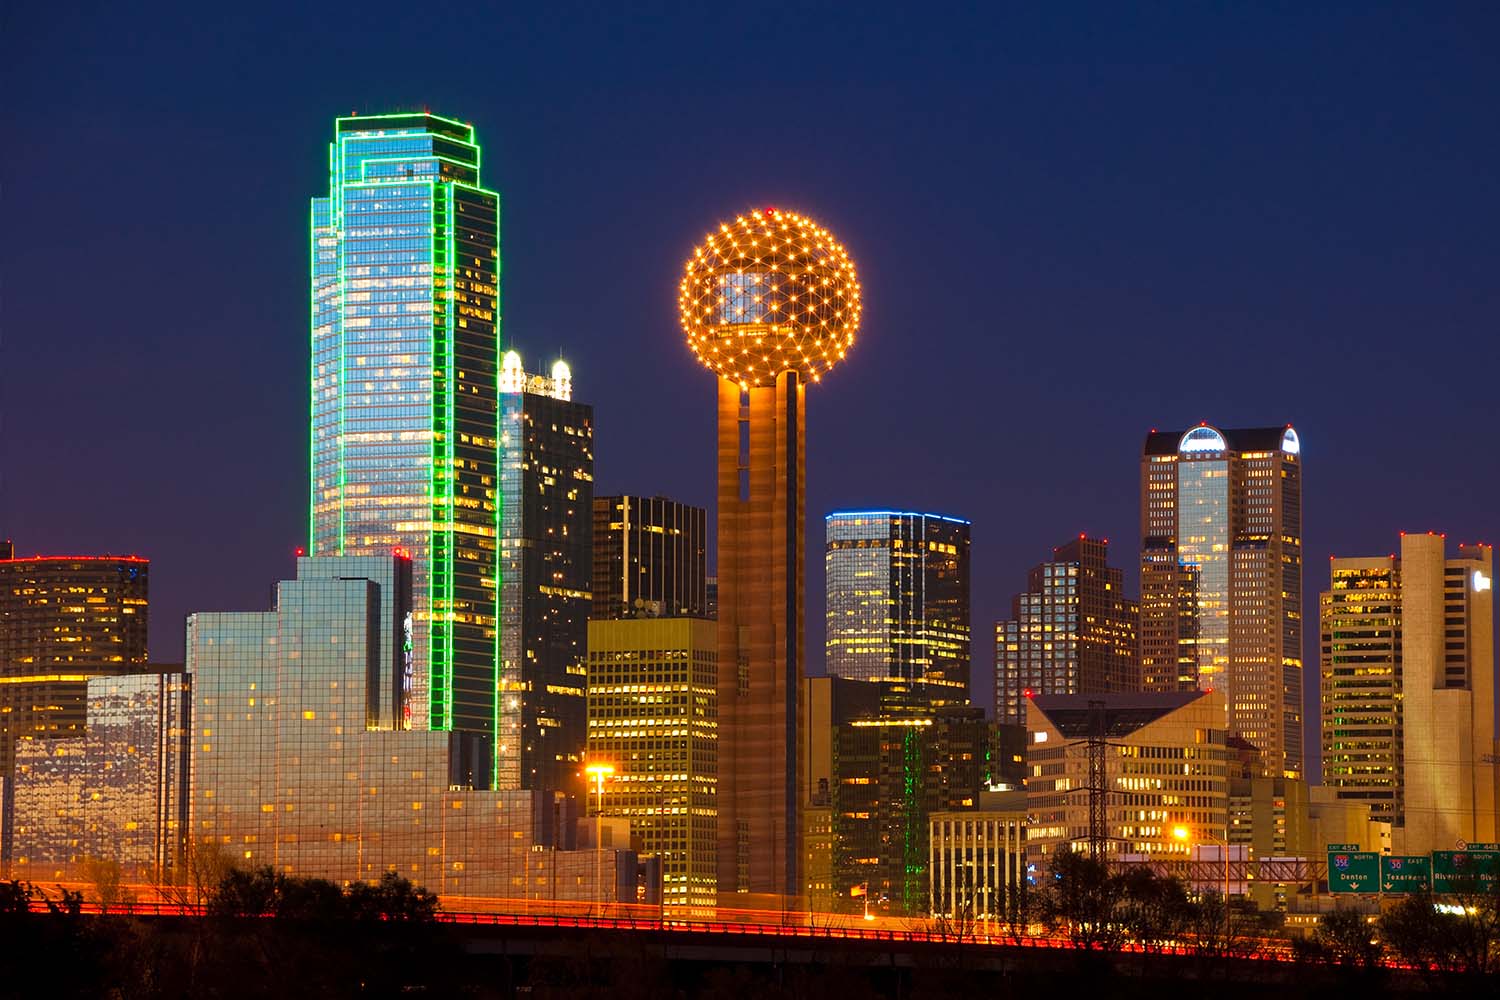 The Reunion Tower